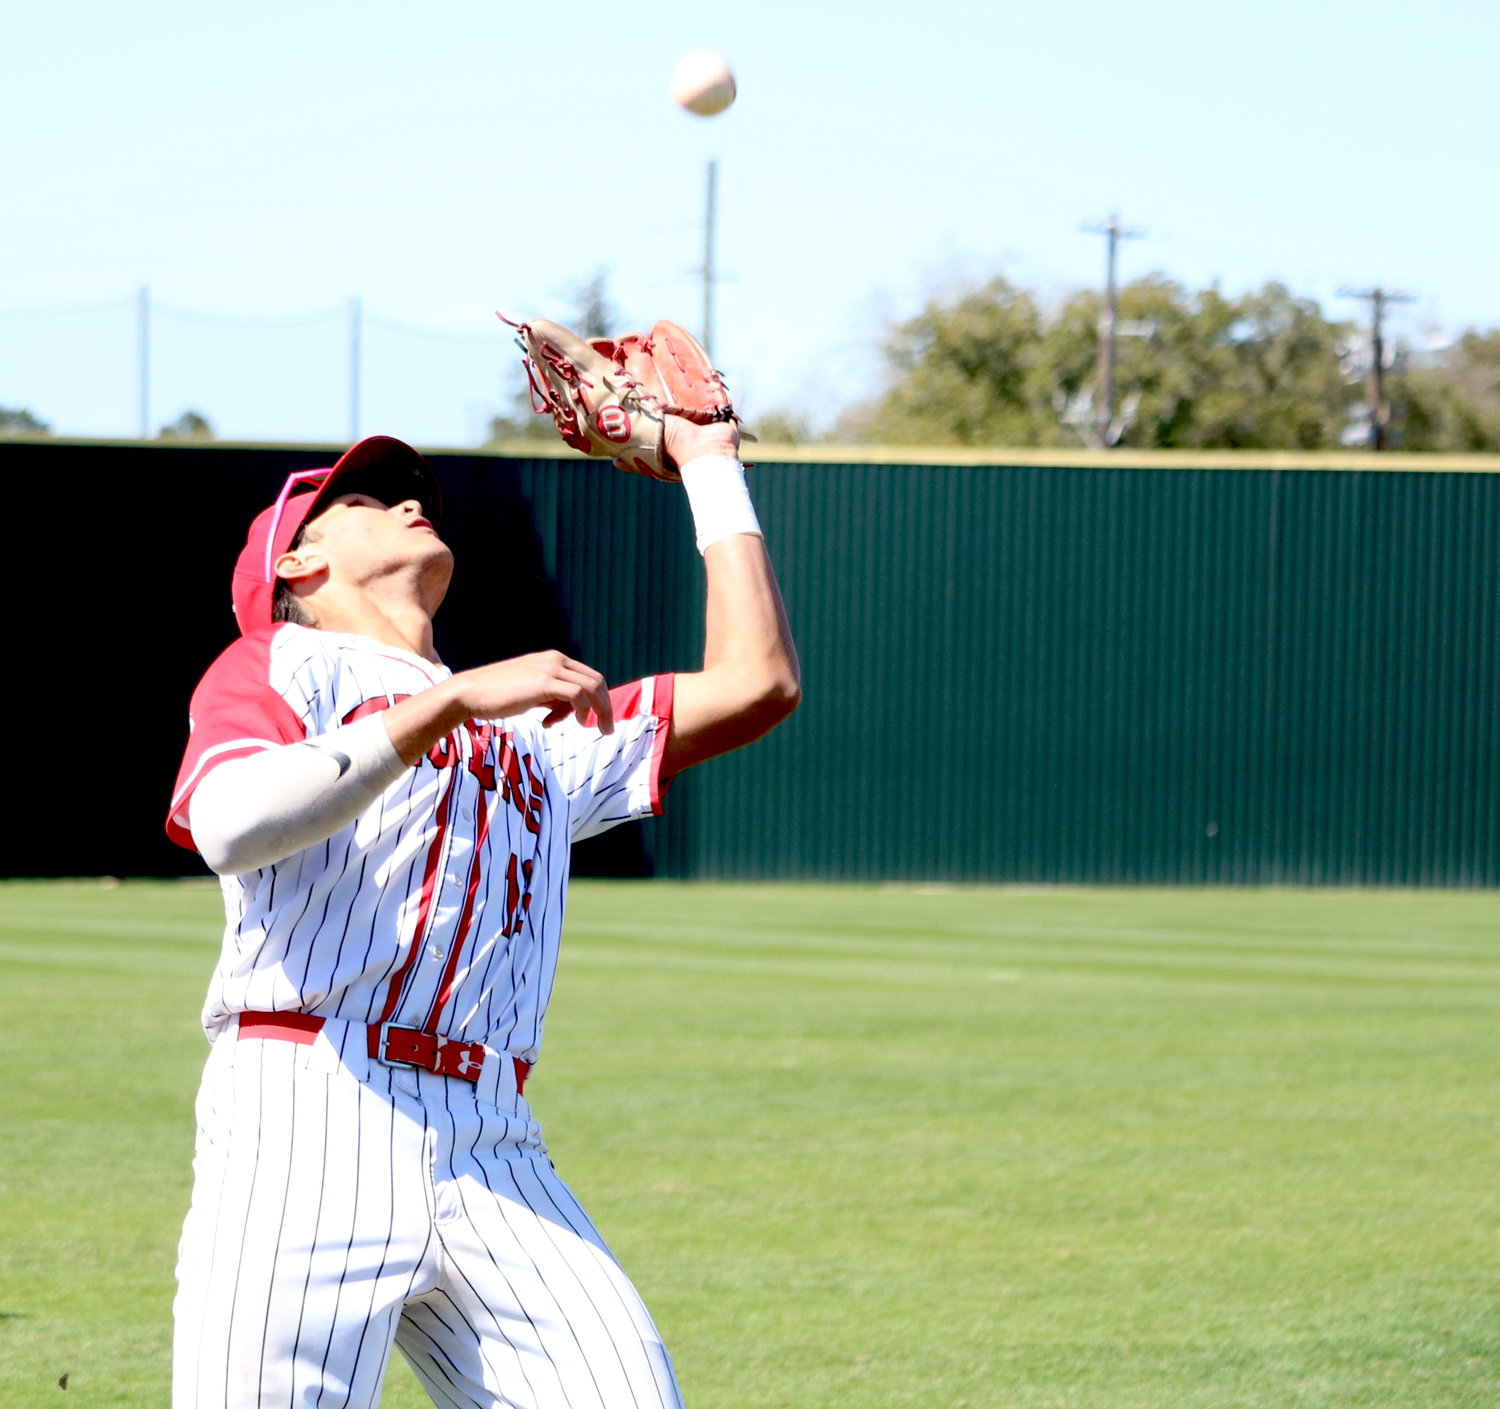 Nayden Ramirez catches a pop fly in foul territory during Friday’s game between Katy and Cinco Ranch at the Katy baseball field.